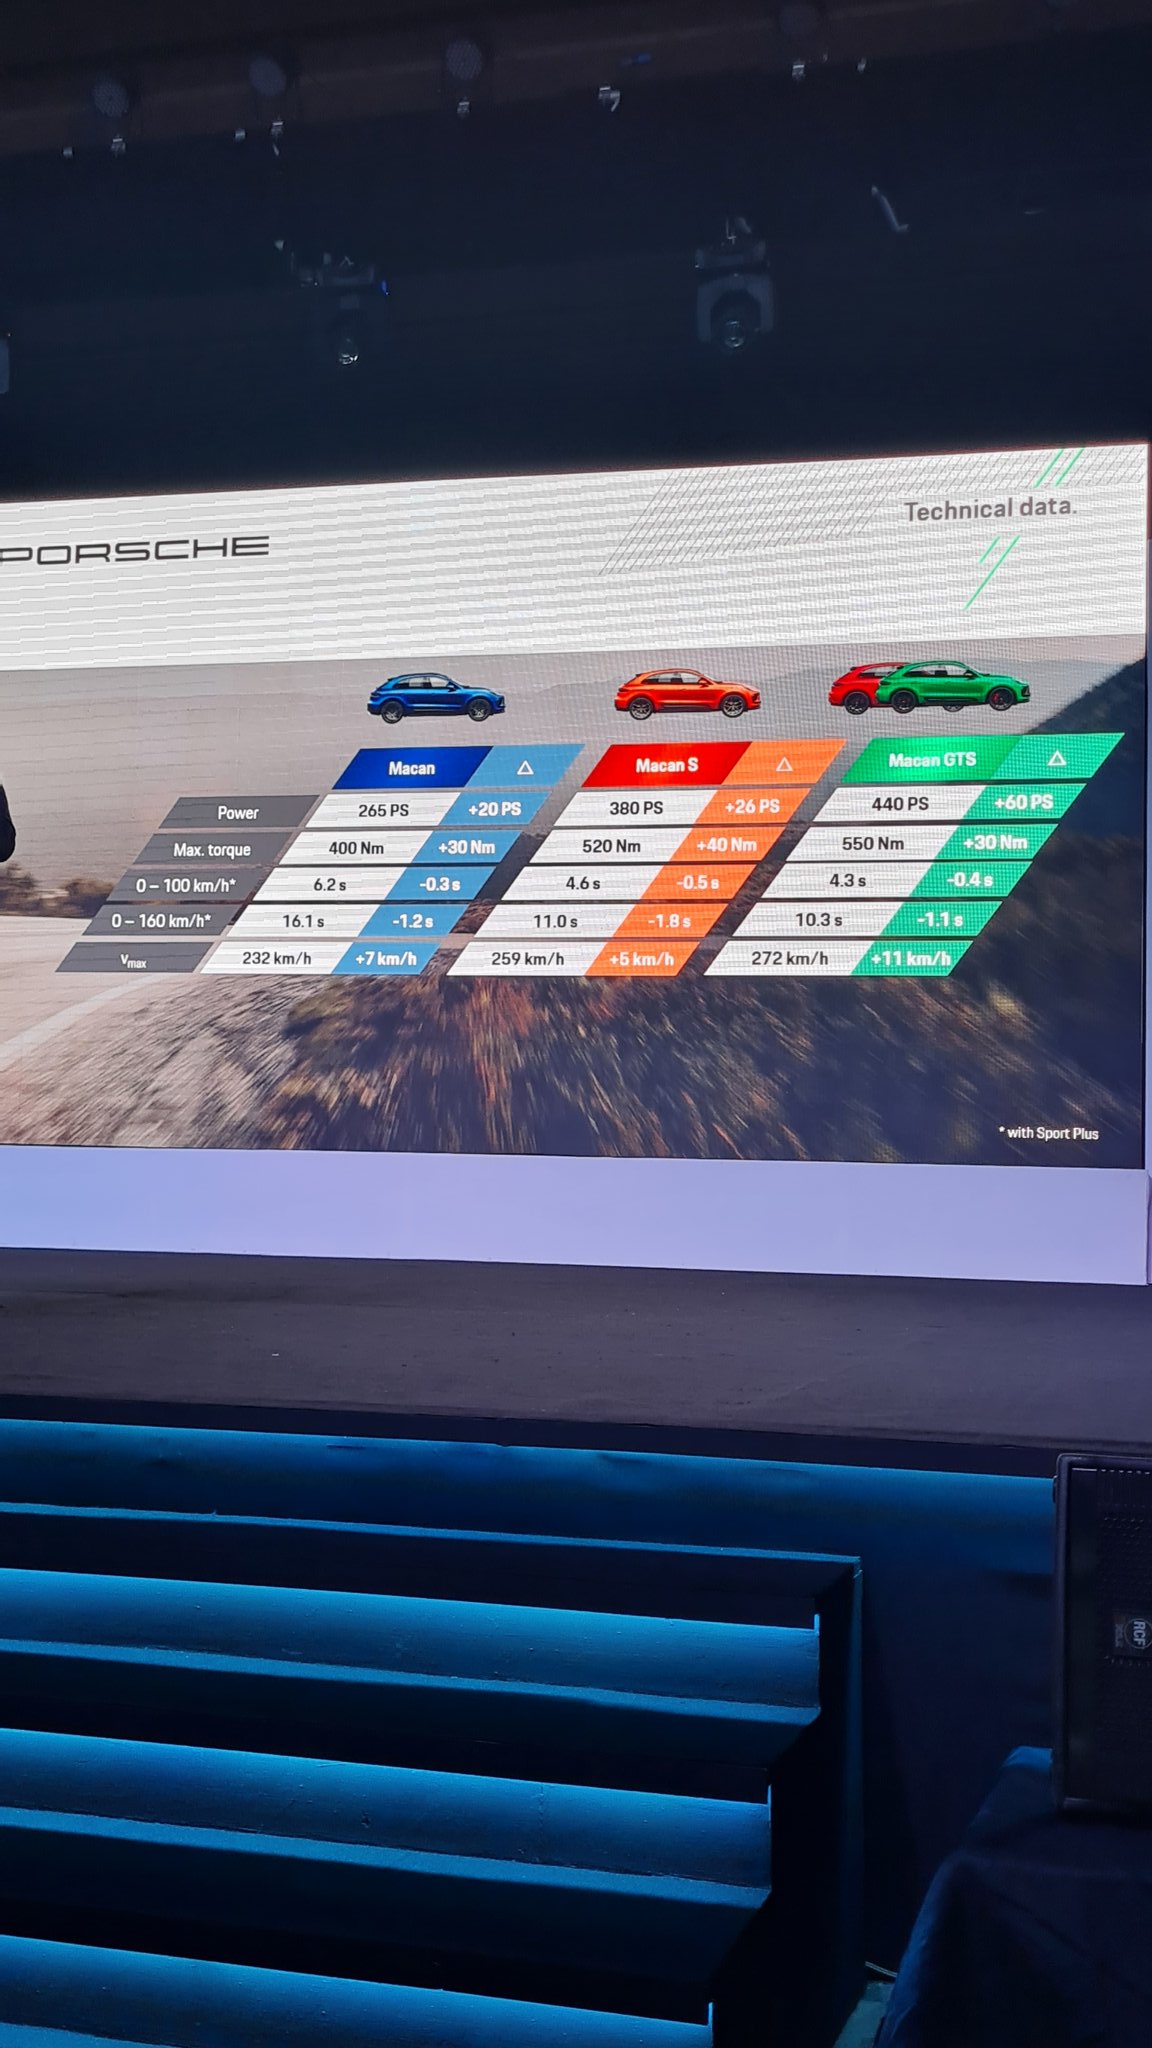 <p>These are the specs for the new Macan. Gets more power, a better interior with more tech and updated looks&nbsp;<br />
&nbsp;</p>